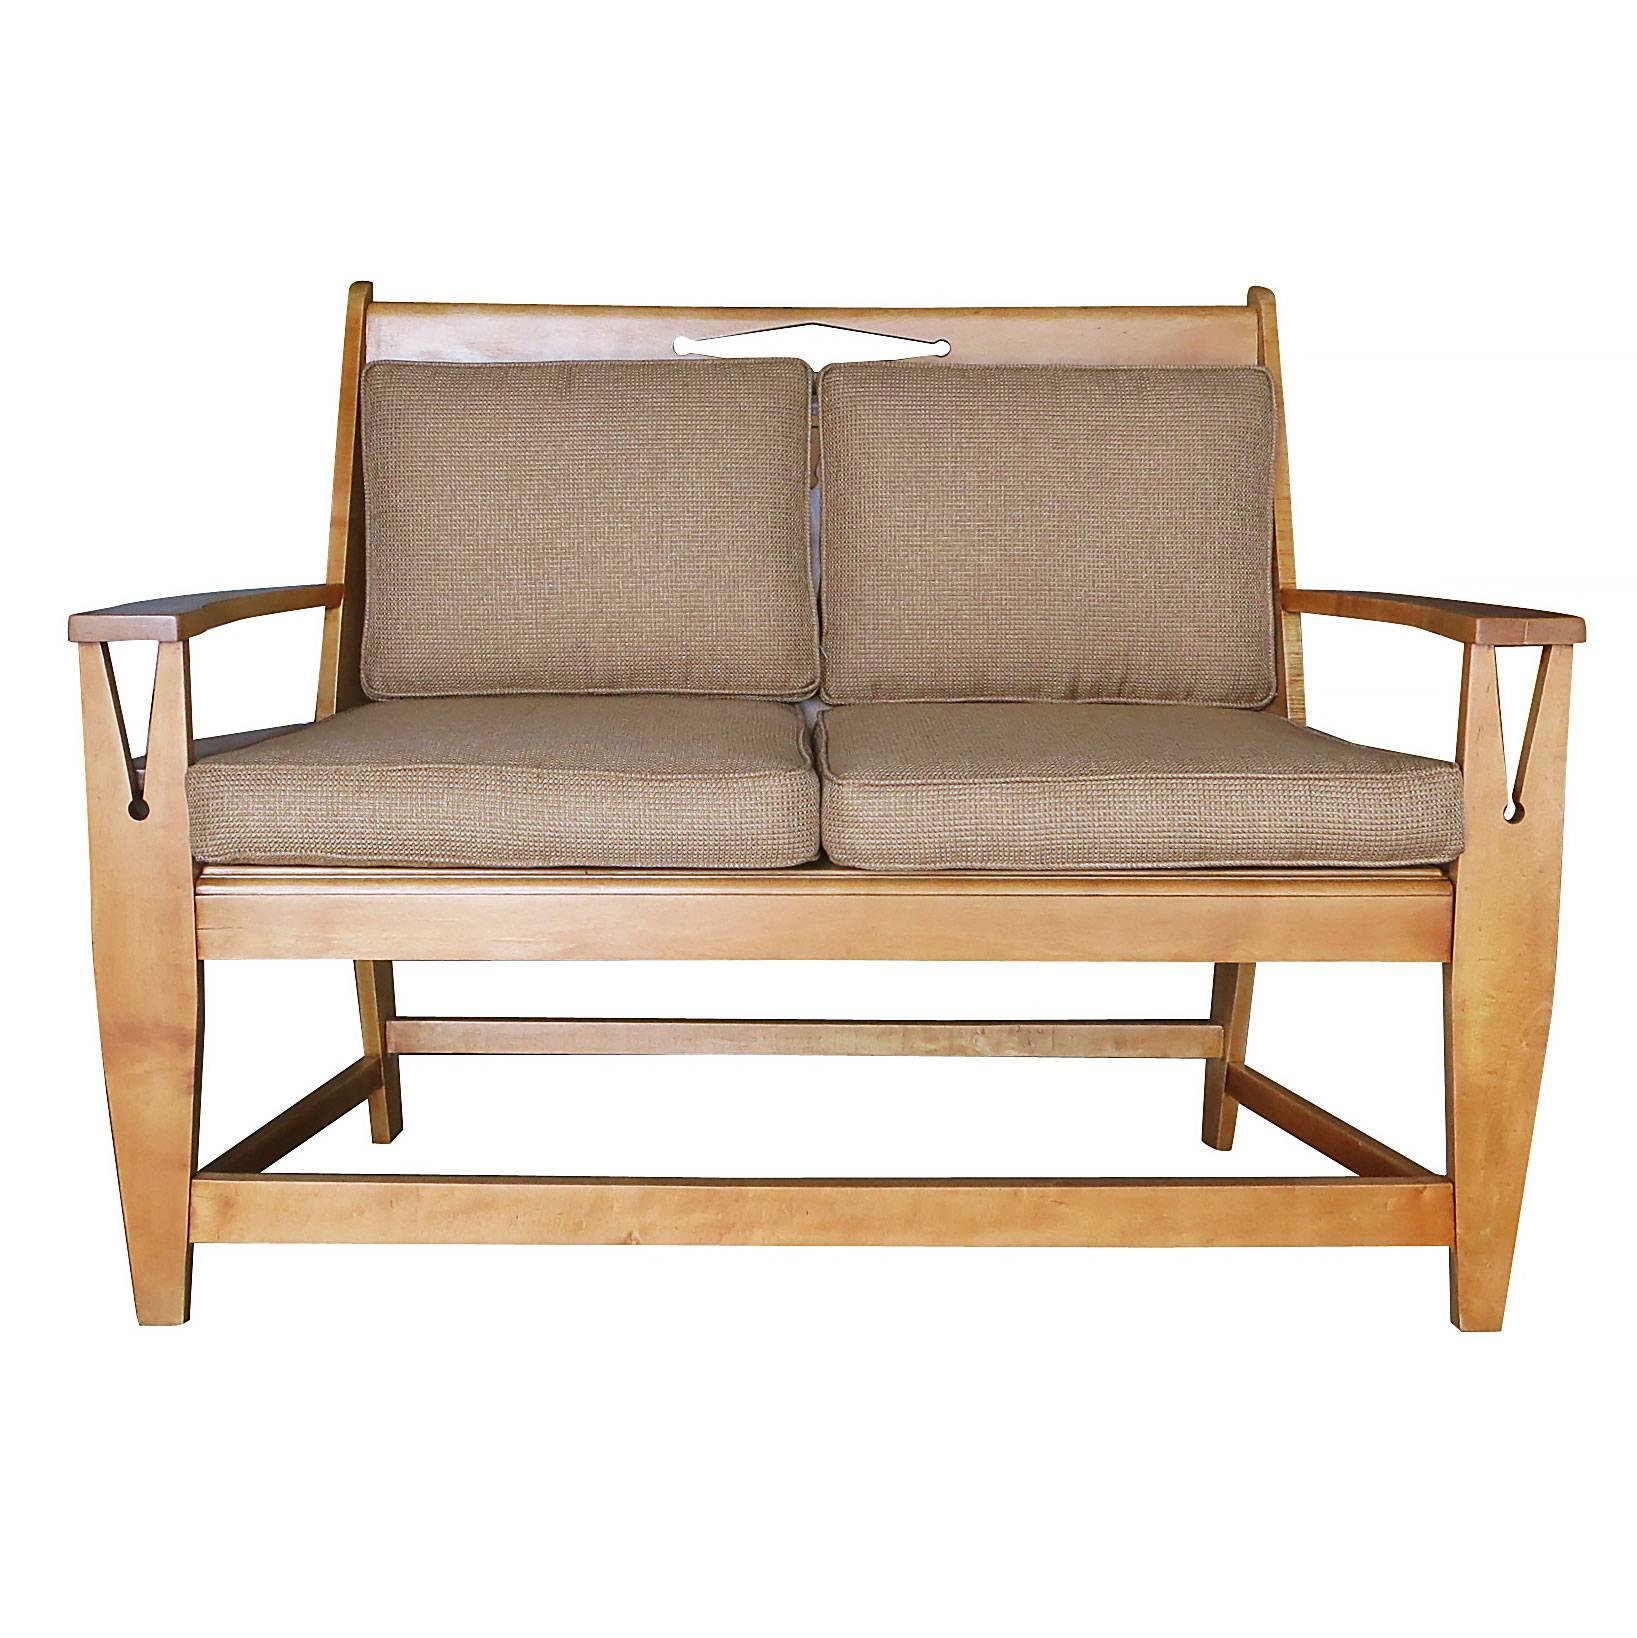 Vintage blonde wood Mission style sofa with clothespin shaped accents along the armrests and back and wicker cane seat in the style of Stickley. Comes with original cushions.

Stickley furniture is renowned for its exceptional craftsmanship and